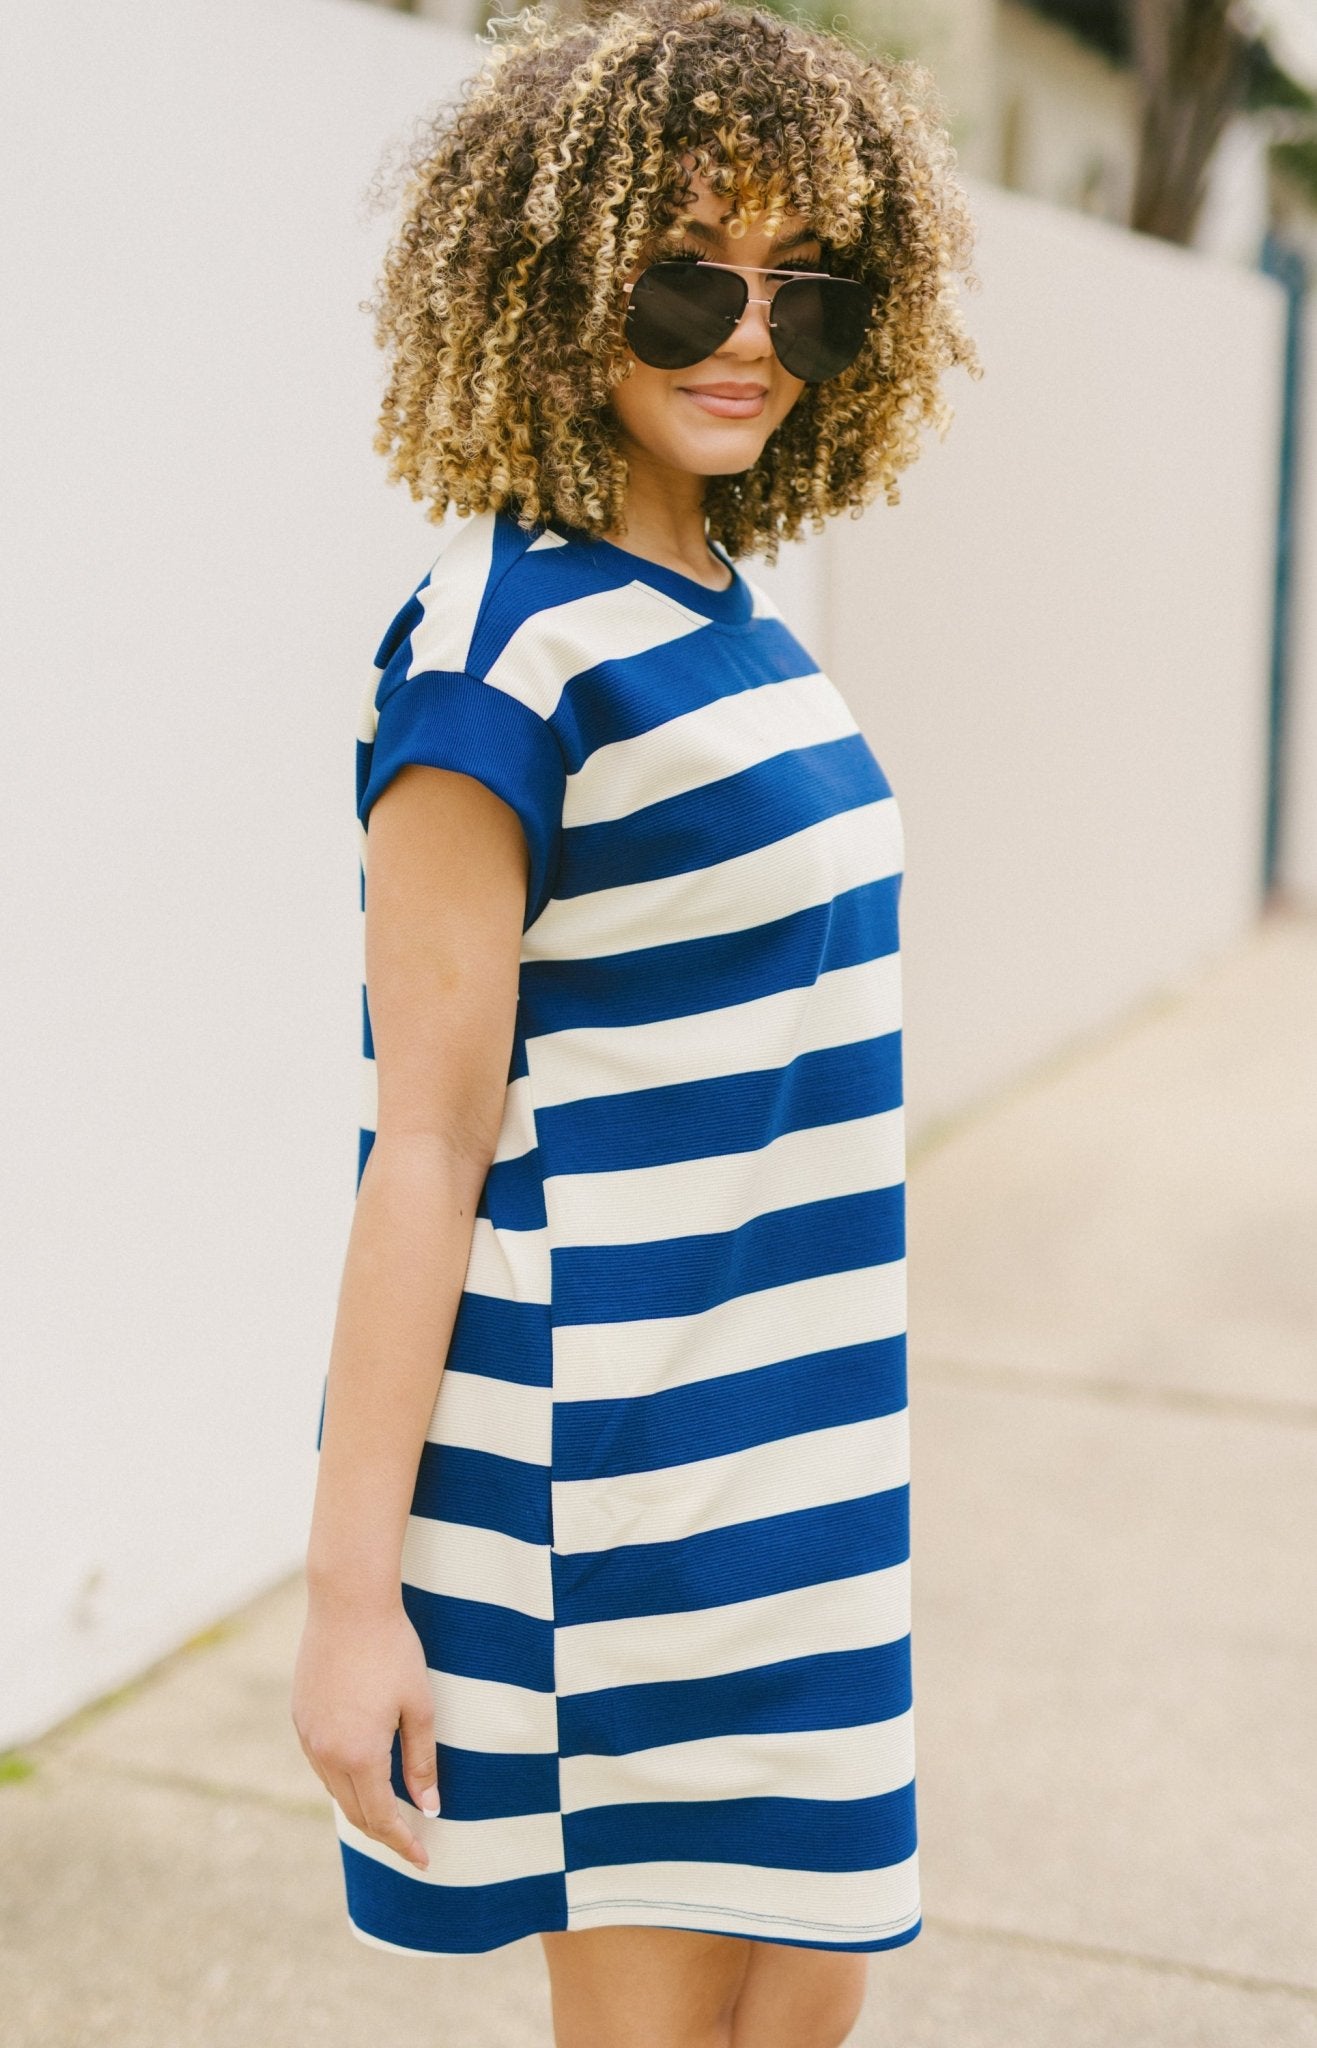 Busy Bee Dress, NAVY Dresses Under $100 - 26